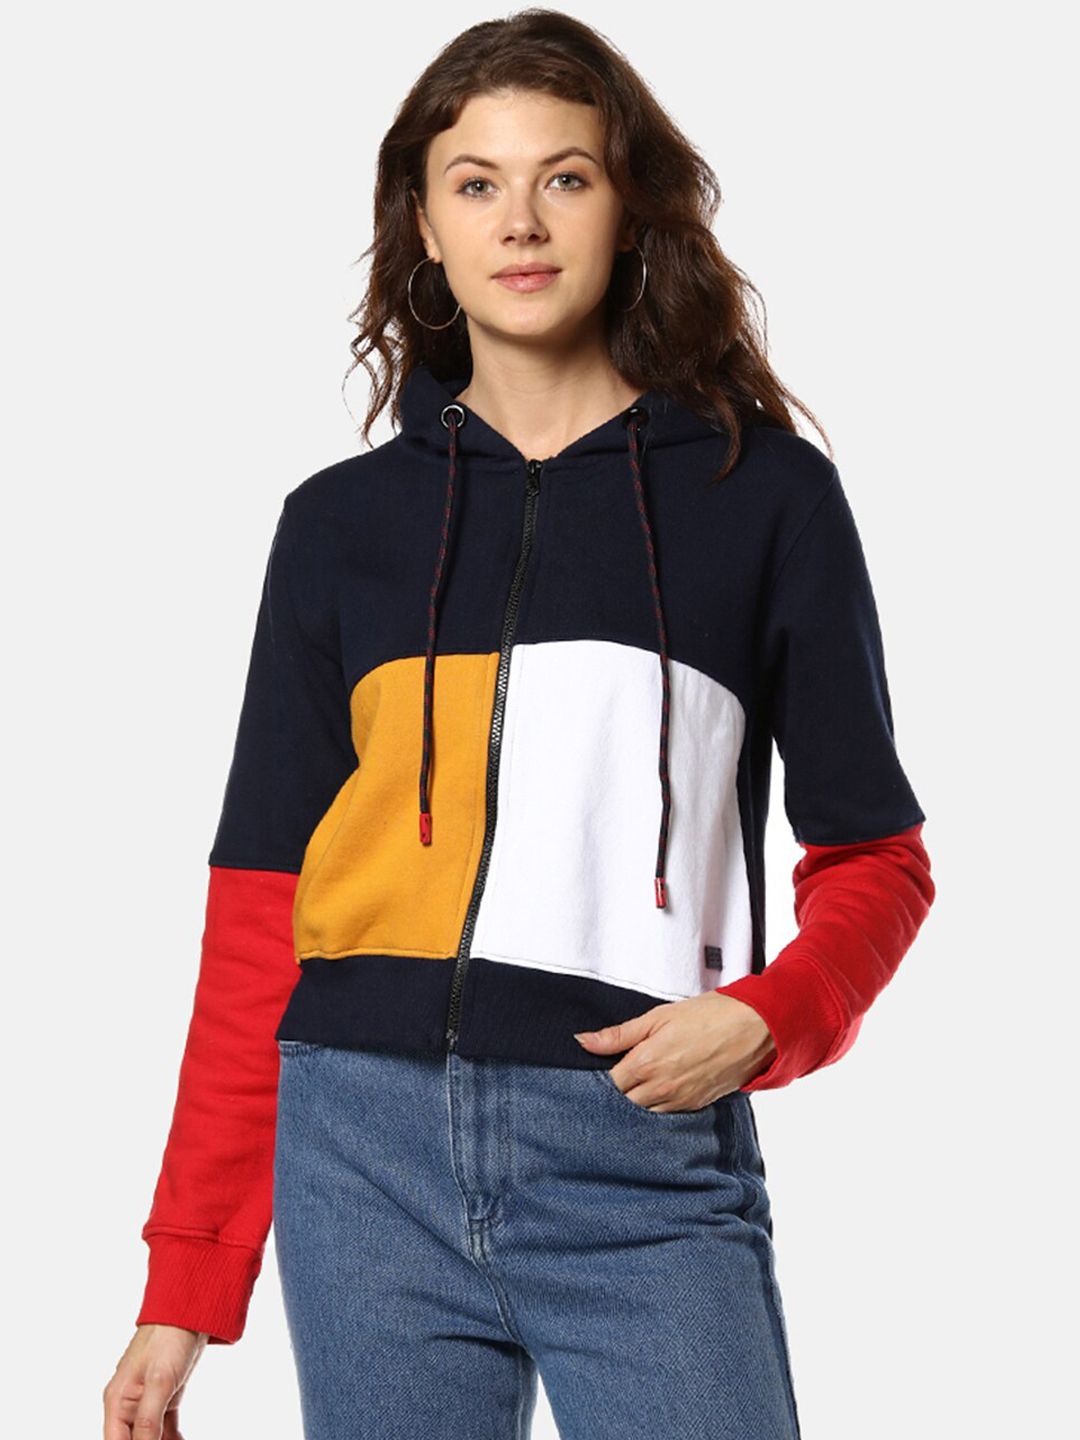 Campus Sutra Women Blue & Yellow Colourblocked Hooded Sweatshirt Price in India